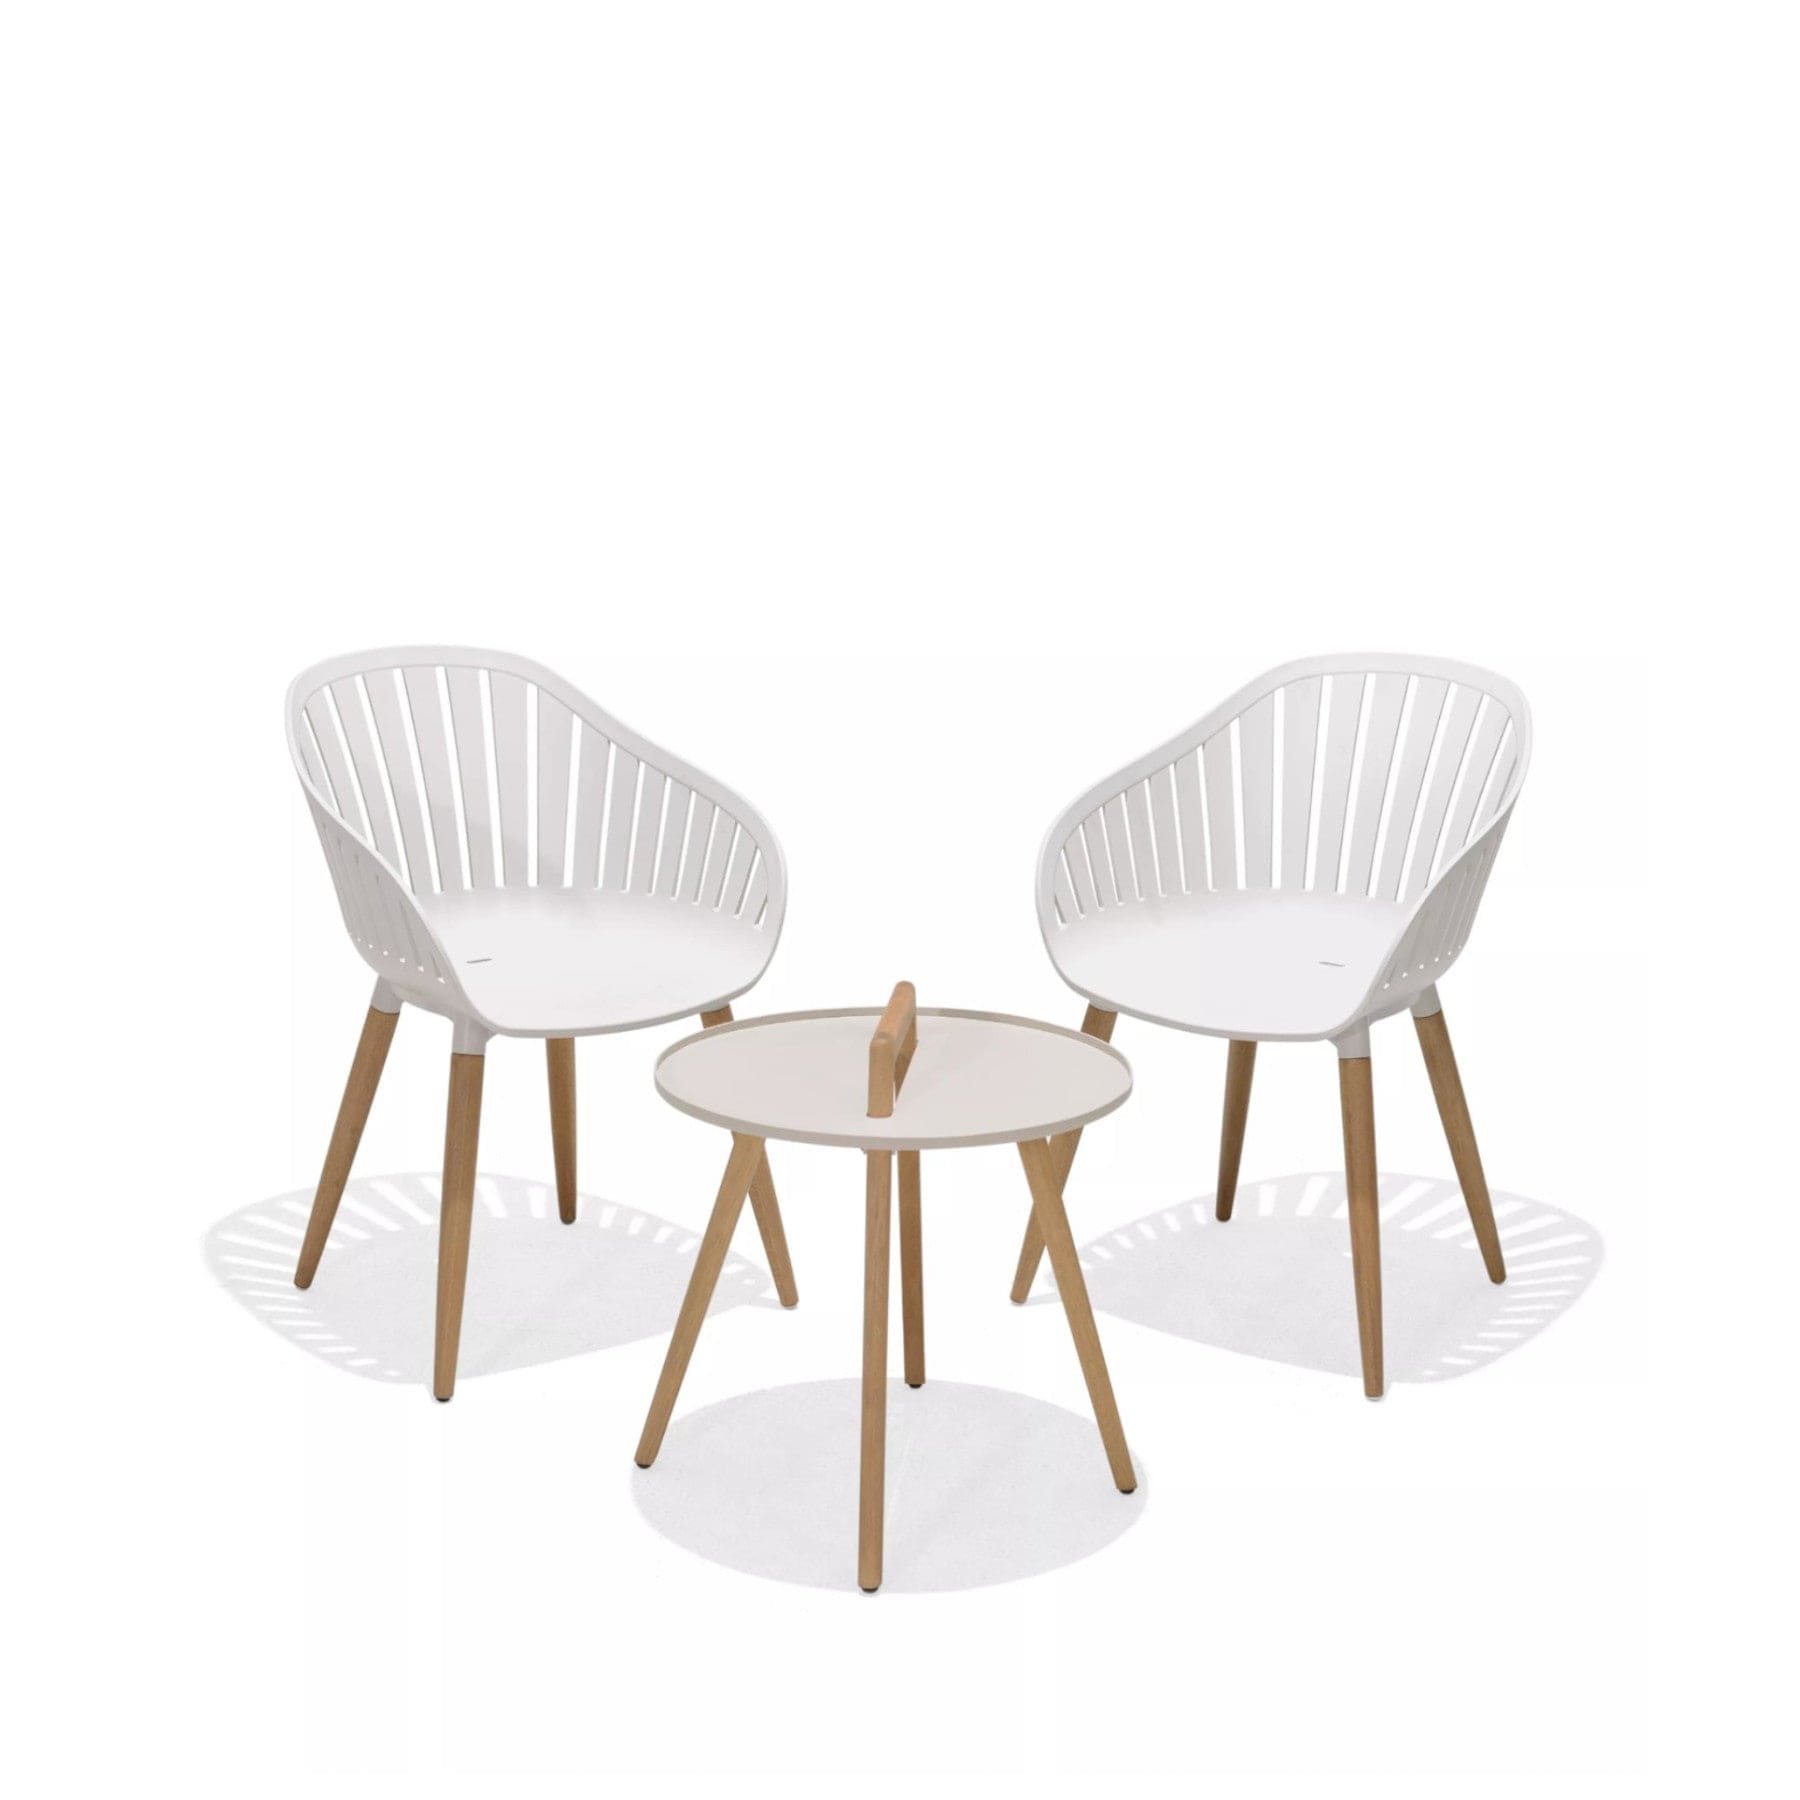 Two modern white dining chairs with wooden legs and a small round white and wooden coffee table on a white background